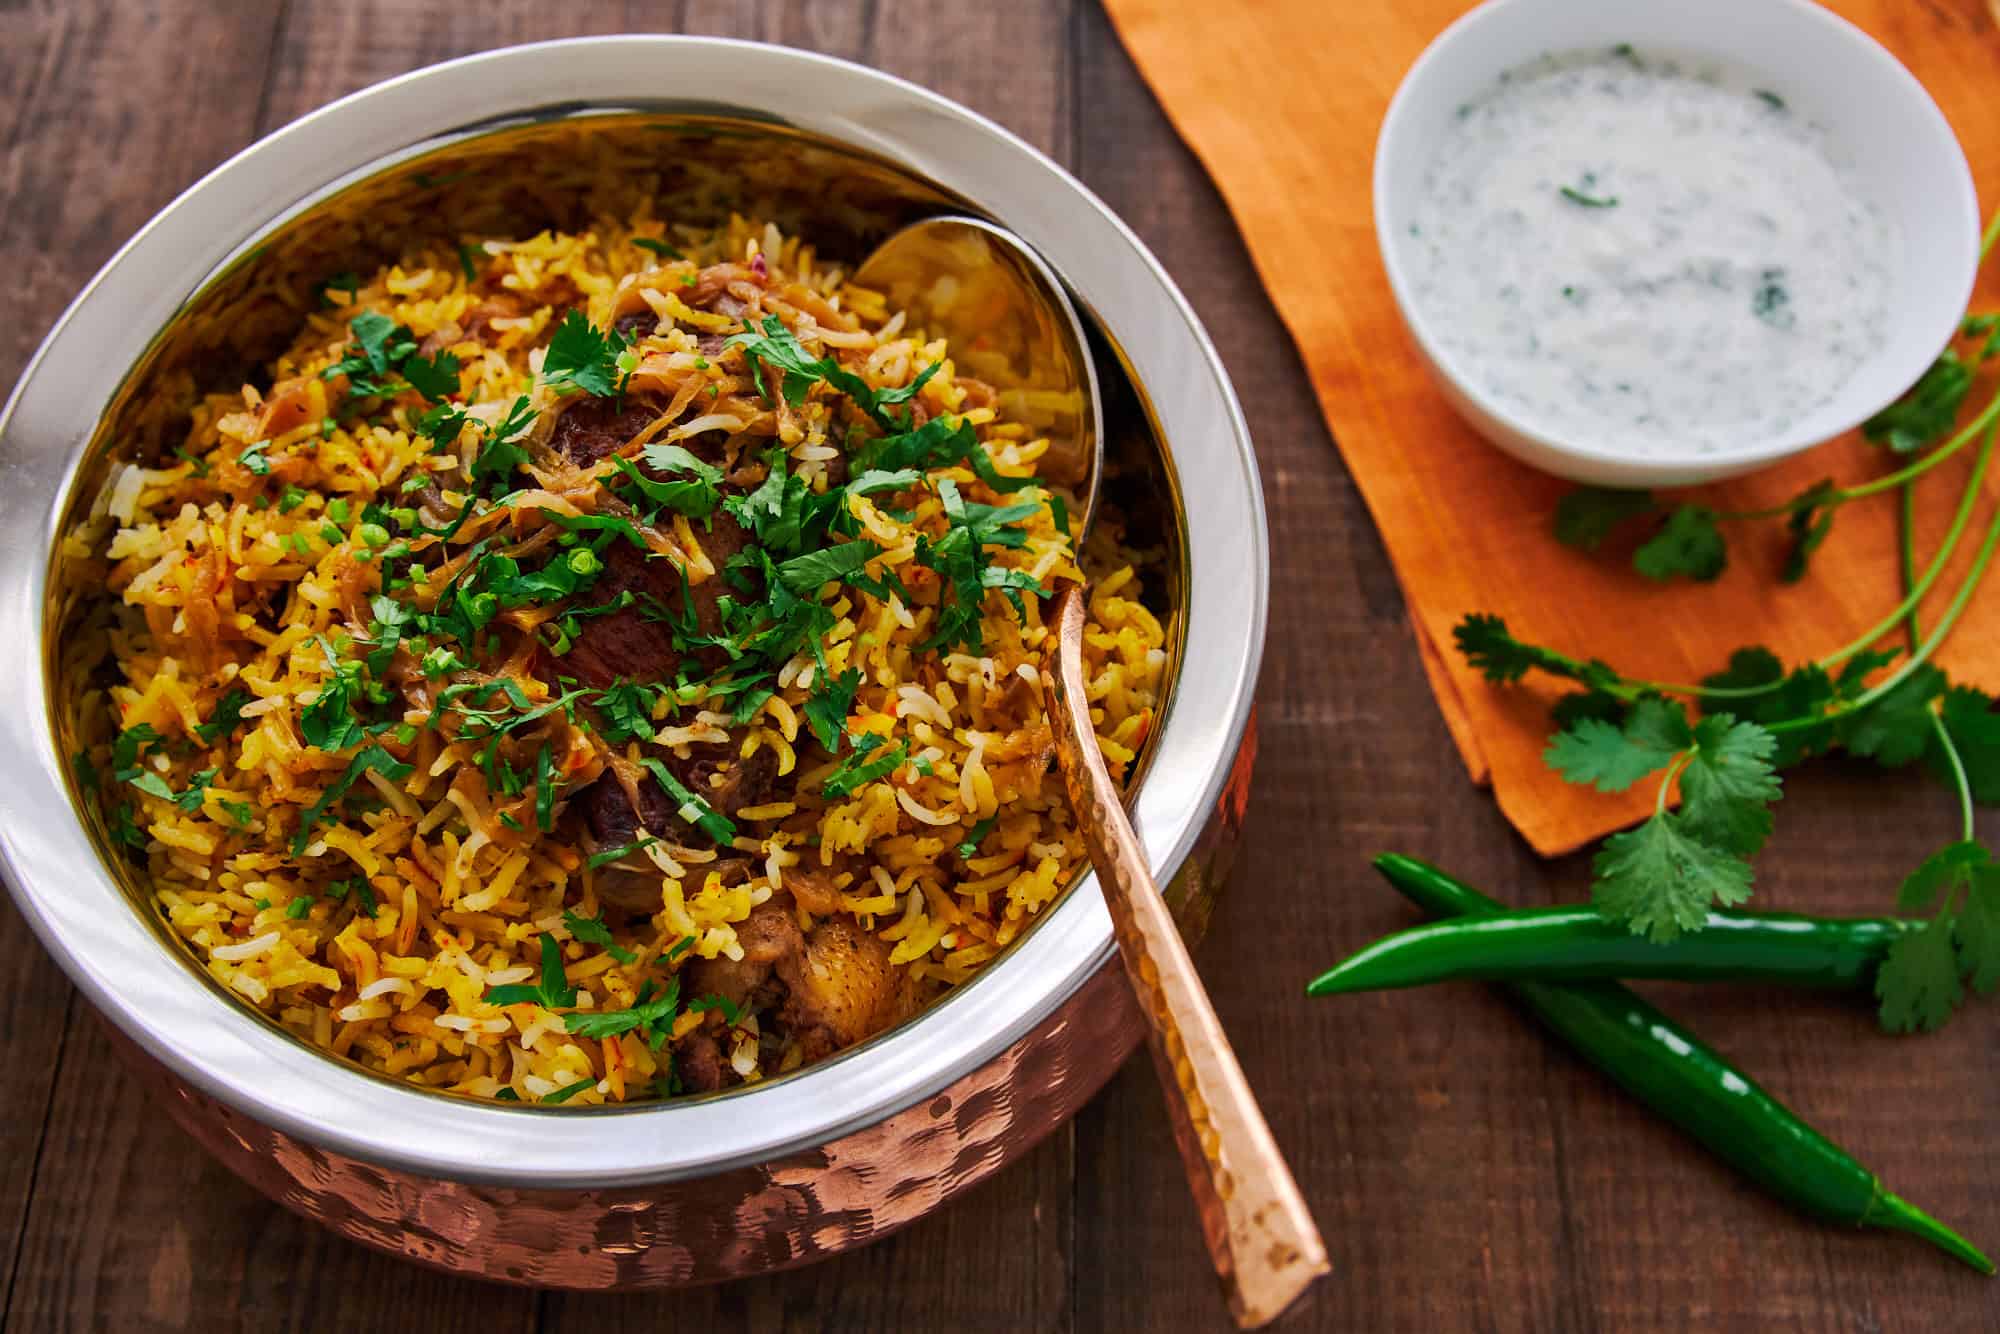 Every mouthful of this sumptuous chicken biryani reveals an explosion of flavor from the perfectly seasoned chicken to the fragrant, spiced rice.